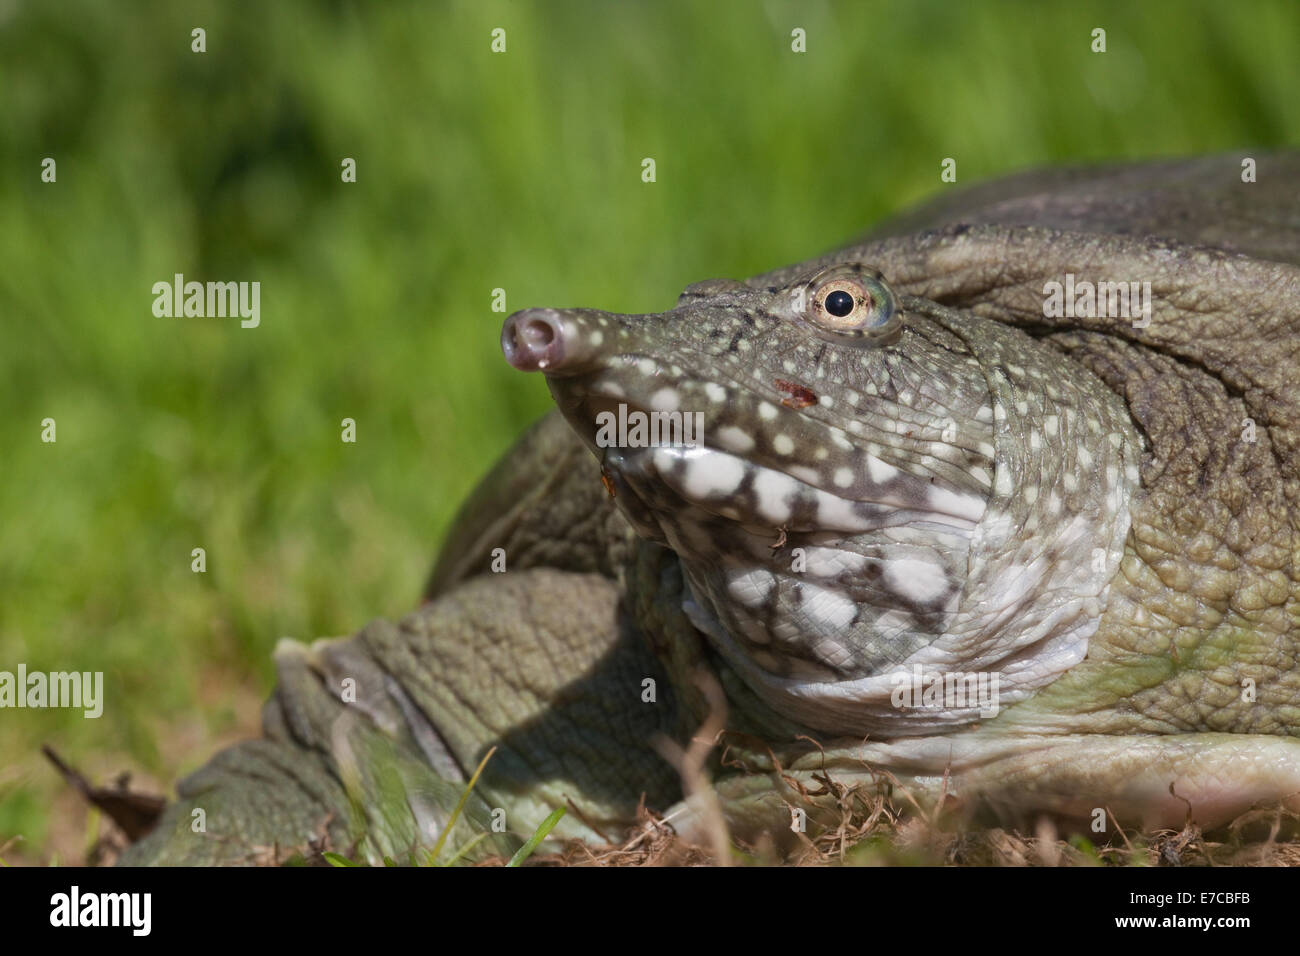 Chinese Softshell Turtle (Pelodiscus sinensis). On land. Head and neck partially withdrawn. Stock Photo